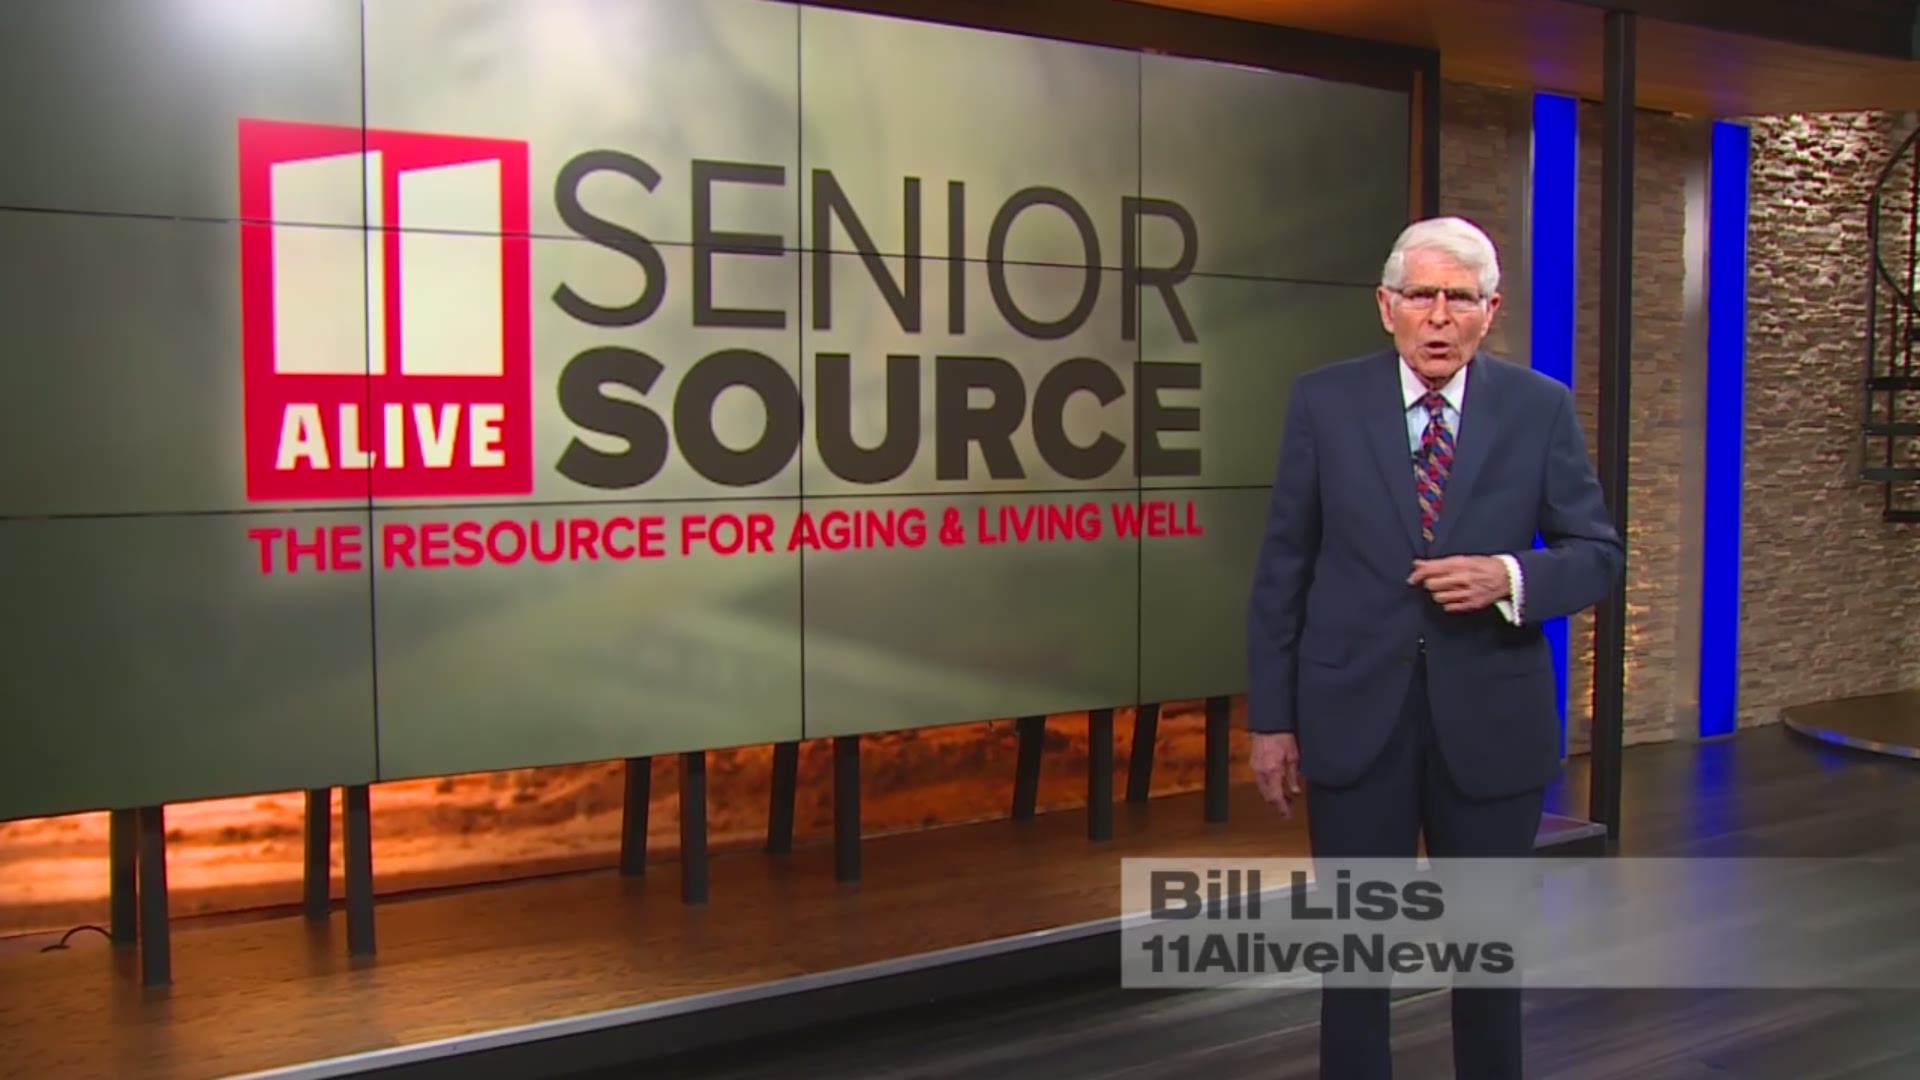 Caution for seniors to be alert for financial scams that can trick you out of your money